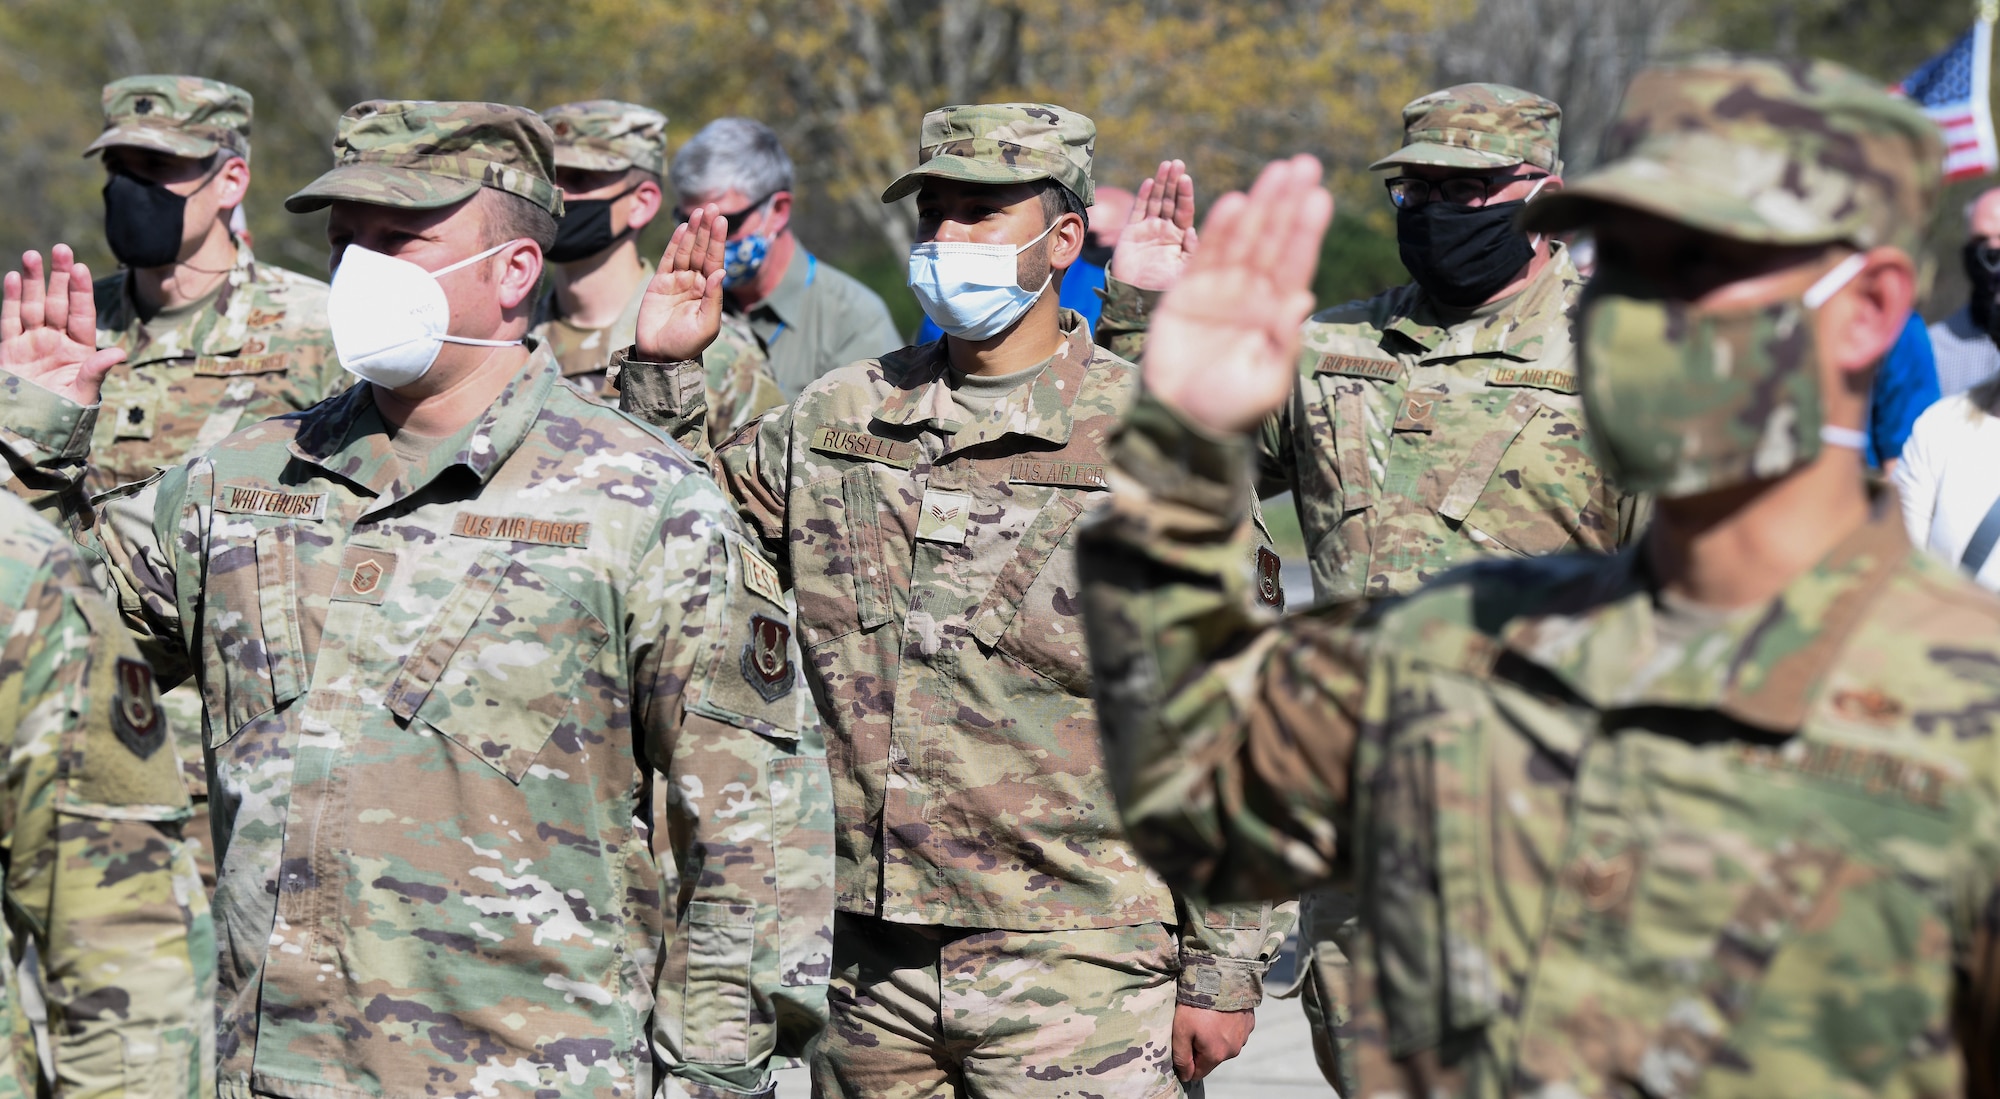 Enlisted Airmen reaffirm their oath of office during a flag retreat ceremony to mark the completion of the Extremism Stand Down exercises, April 6, 2021, at Arnold Air Force Base, Tenn. The importance of the oath of office was a focus of the stand down. (U.S. Air Force photo by Jill Pickett)